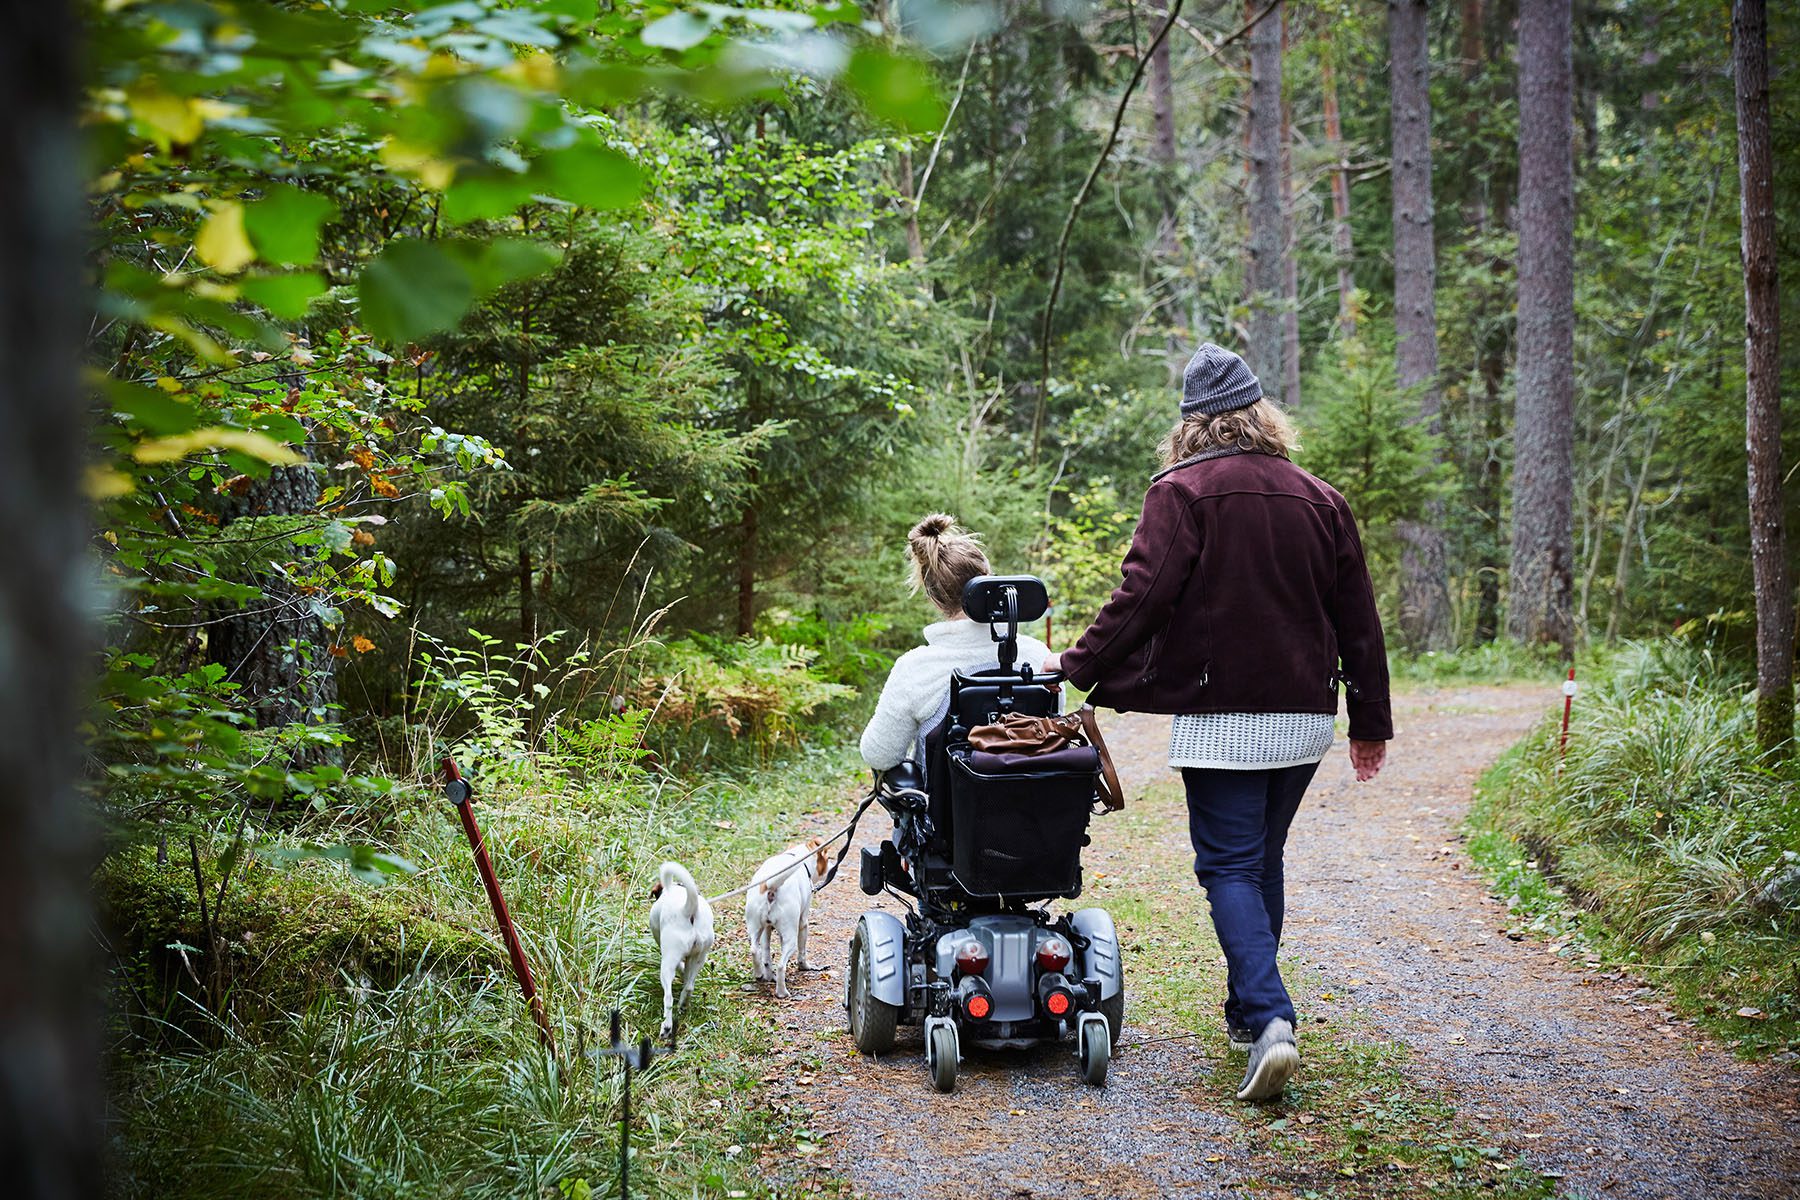 Rear view of male caretaker with a disabled woman and dog taking a walk in a forest.